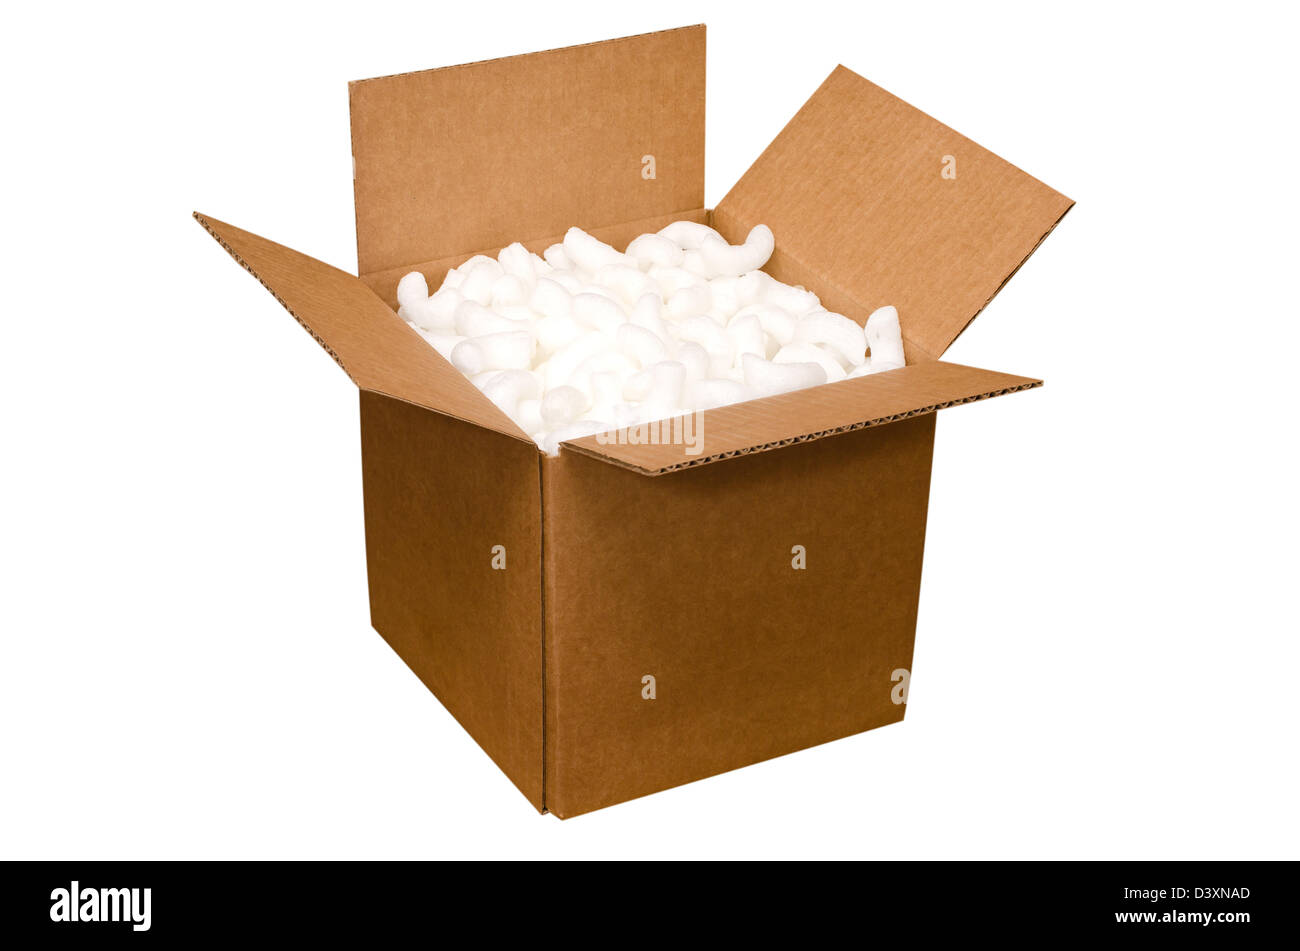 Shipping box with packing peanuts isolated on white background with clipping path. Stock Photo